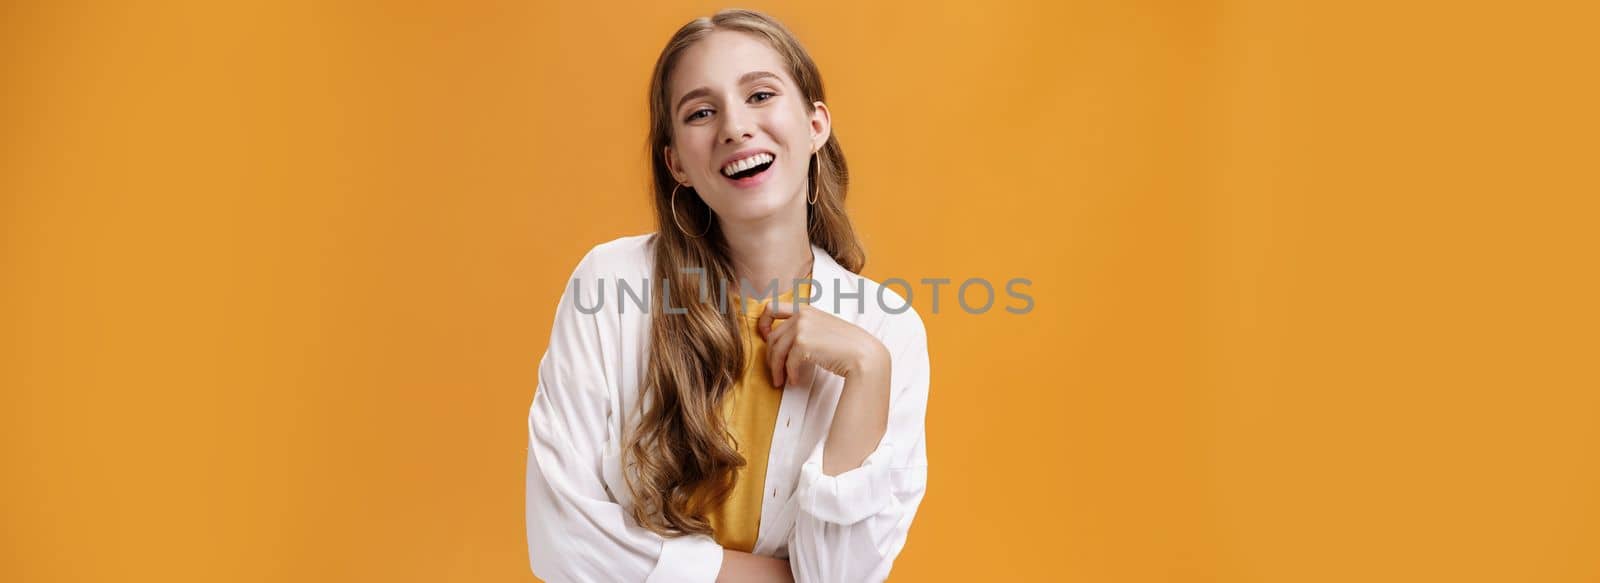 Stylish assertive and confident carefree woman dressing up on party laughing joyfully having fun and amusing talk standing pleased against orange background in white blouse over t-shirt by Benzoix